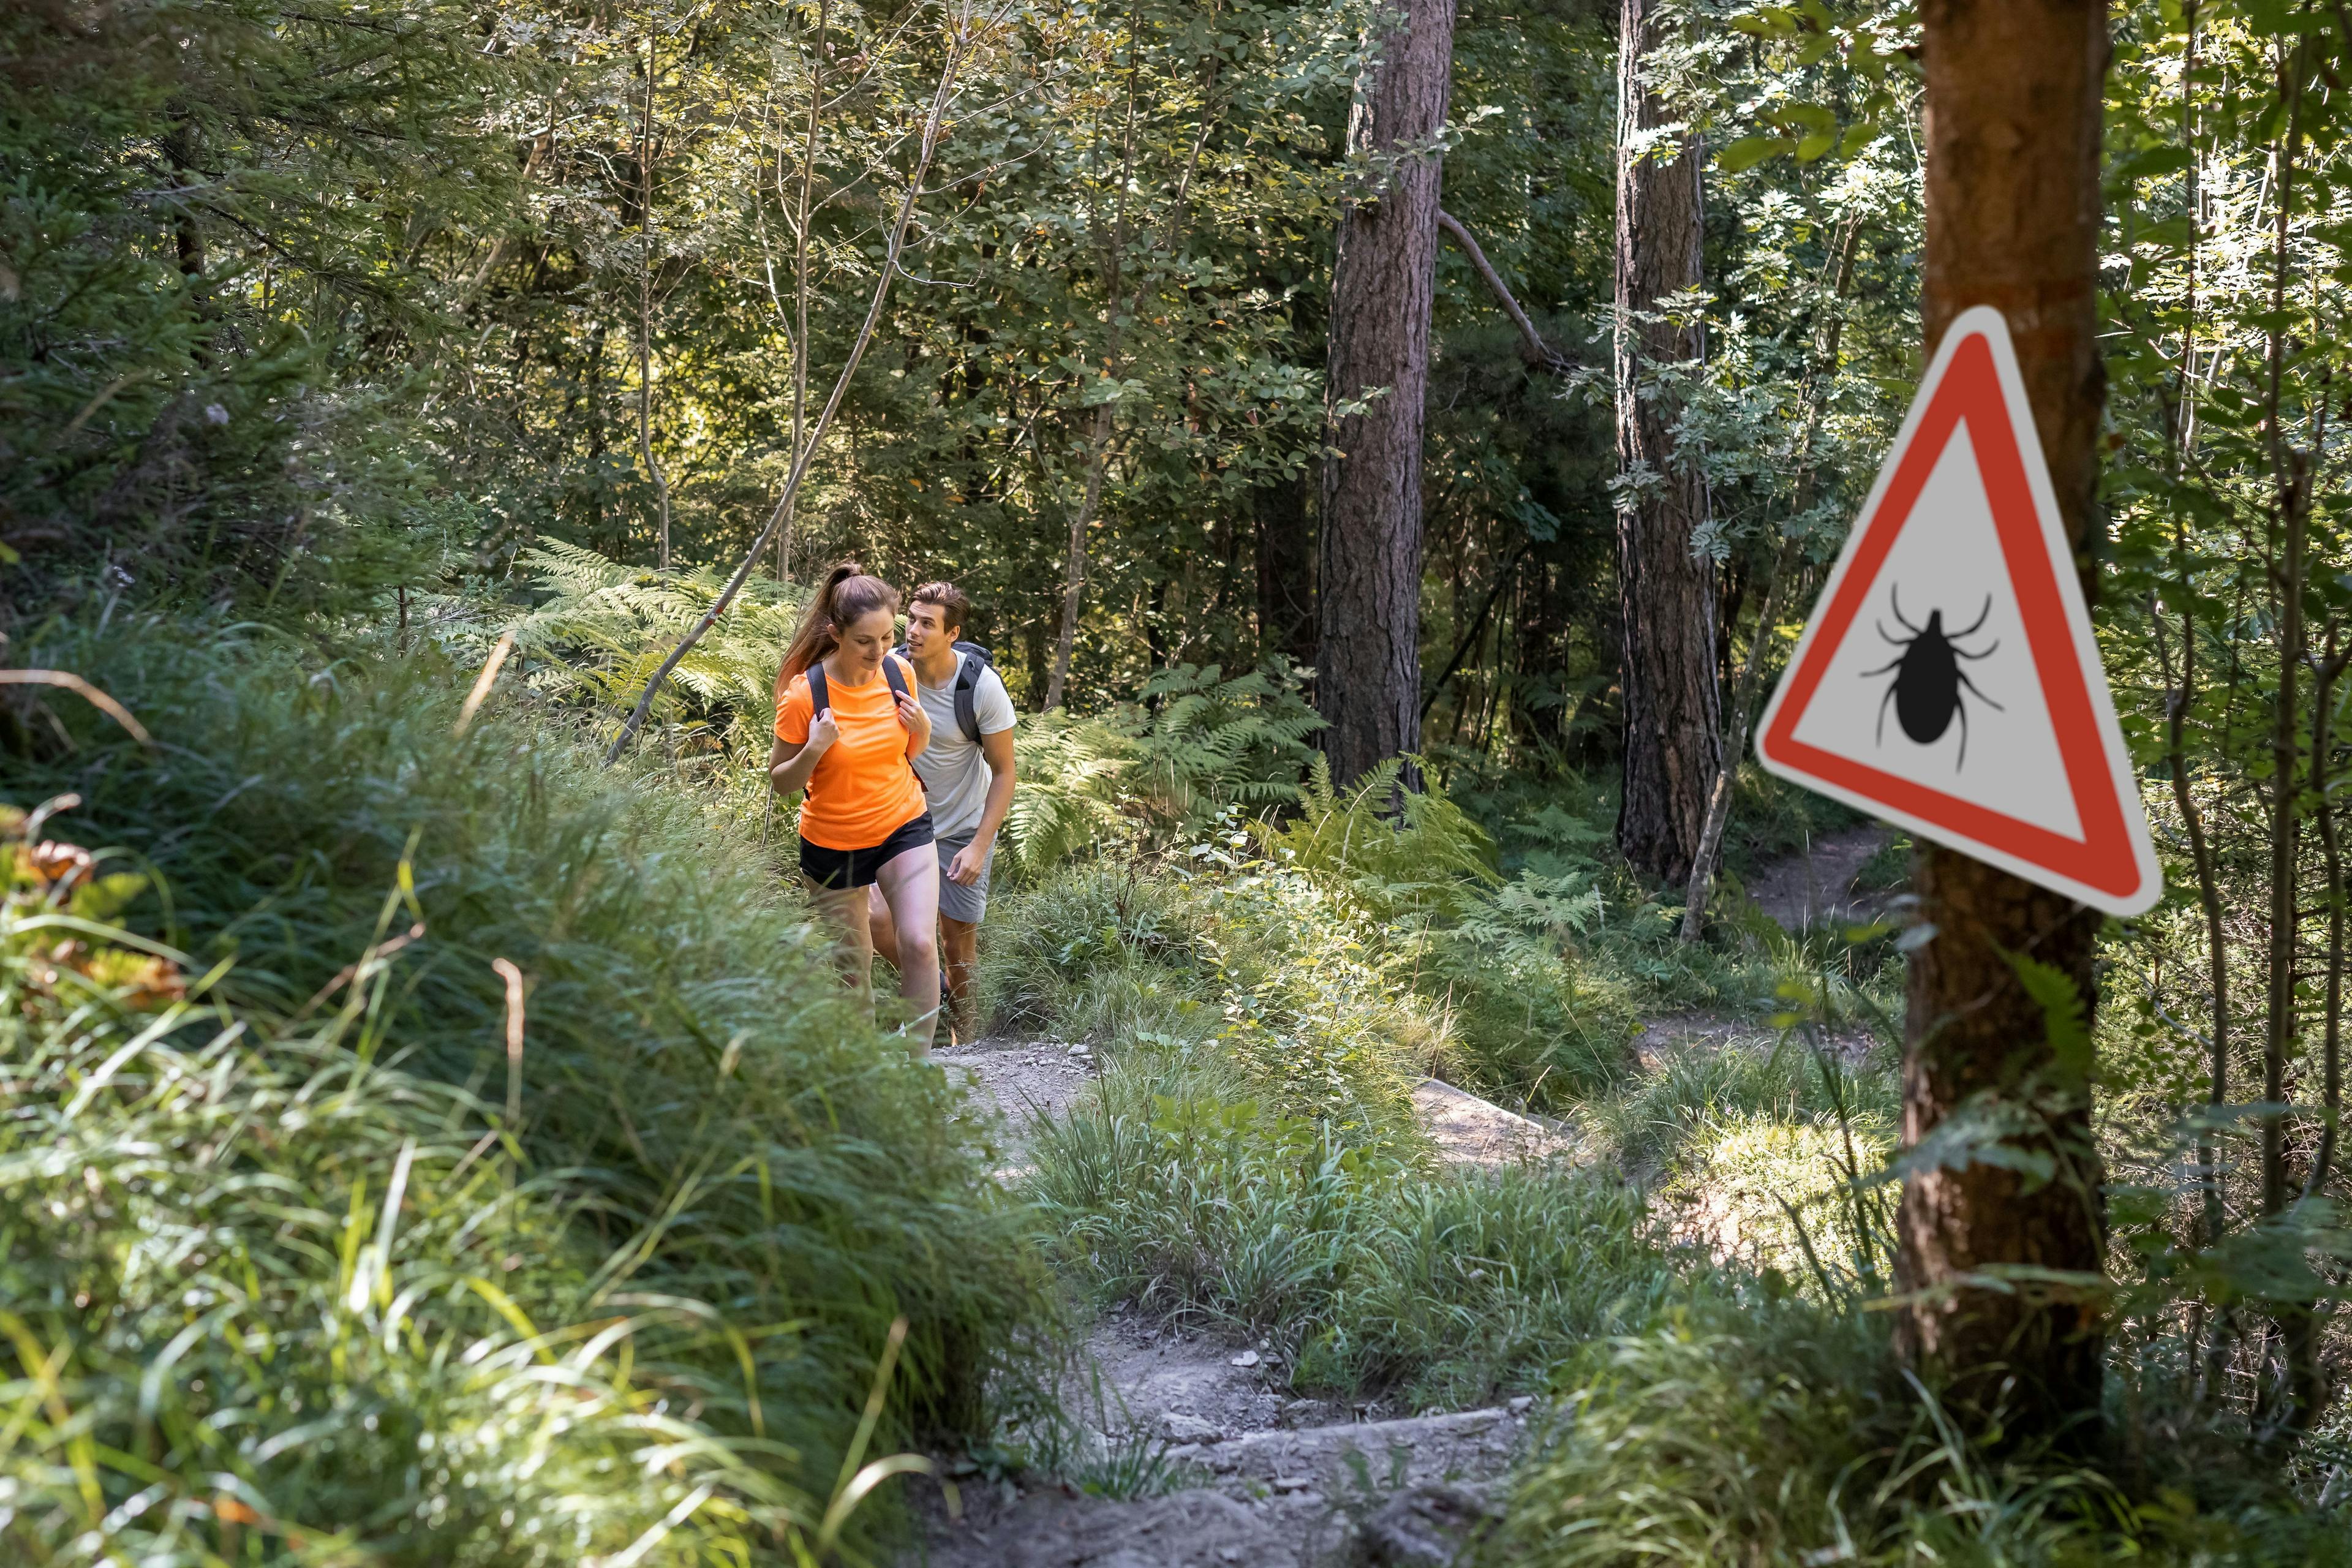 Man and woman hiking in Infected ticks forest with warning sign. Risk of tick-borne and lyme disease - Image credit: 24K-Production | stock.adobe.com